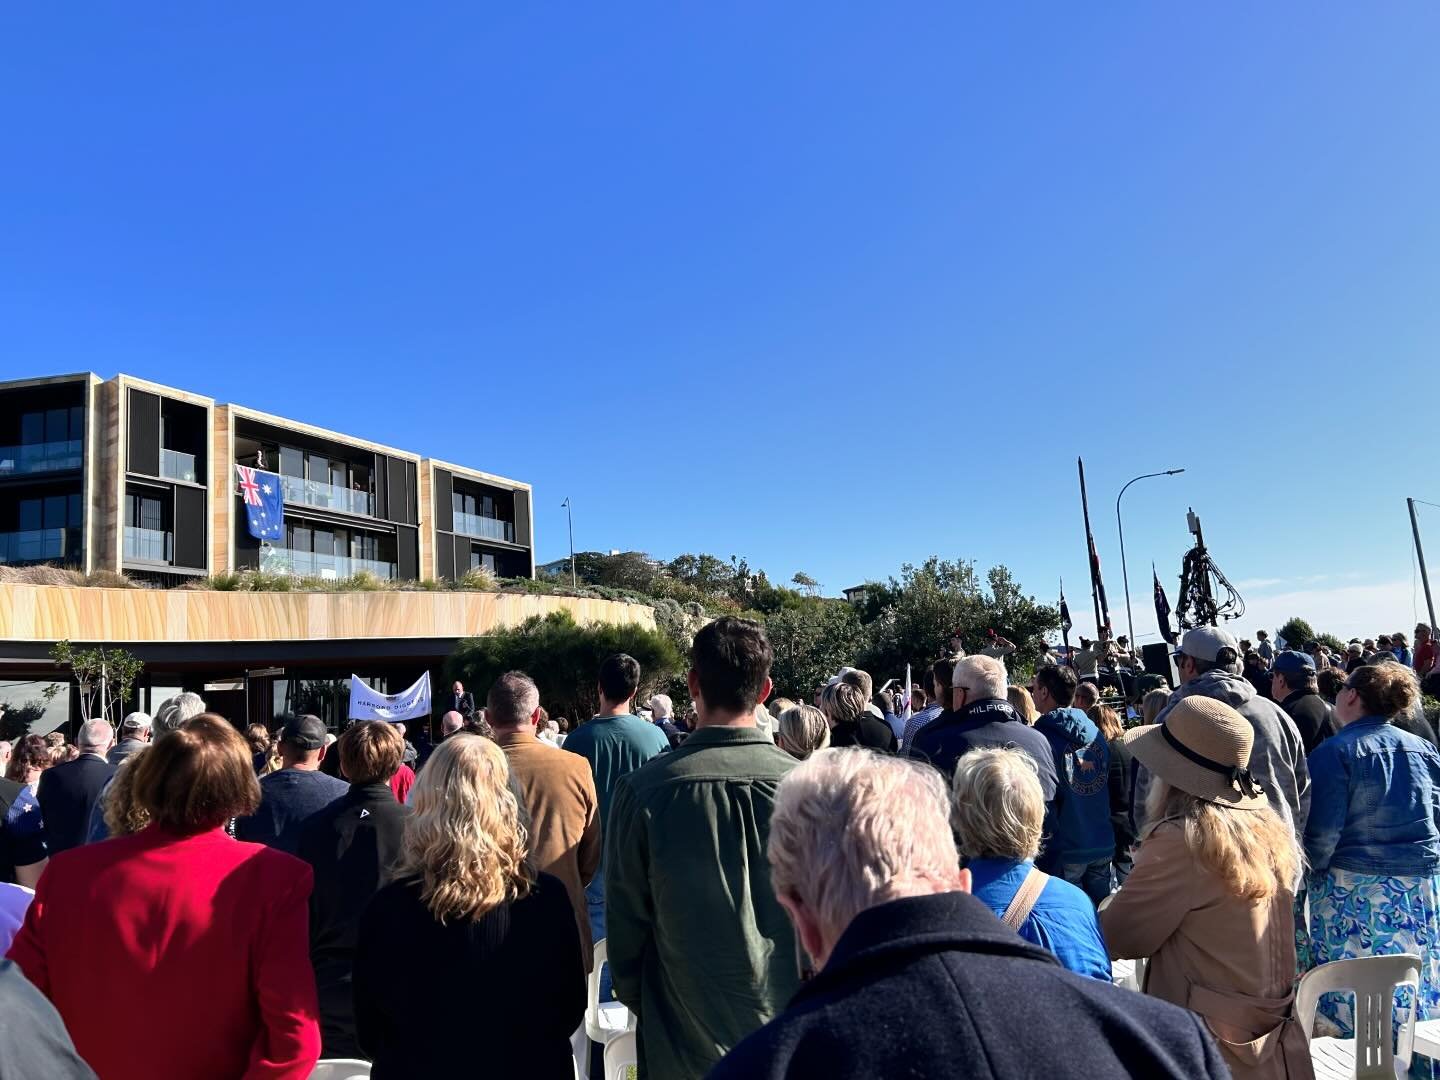 #sydney A great service at the @harborddiggers today run by @mountiesgroup. Locals paying their respects and reflecting on the contributions of past and present servicemen and women, who have made the ultimate sacrifice for their country. A march, wr